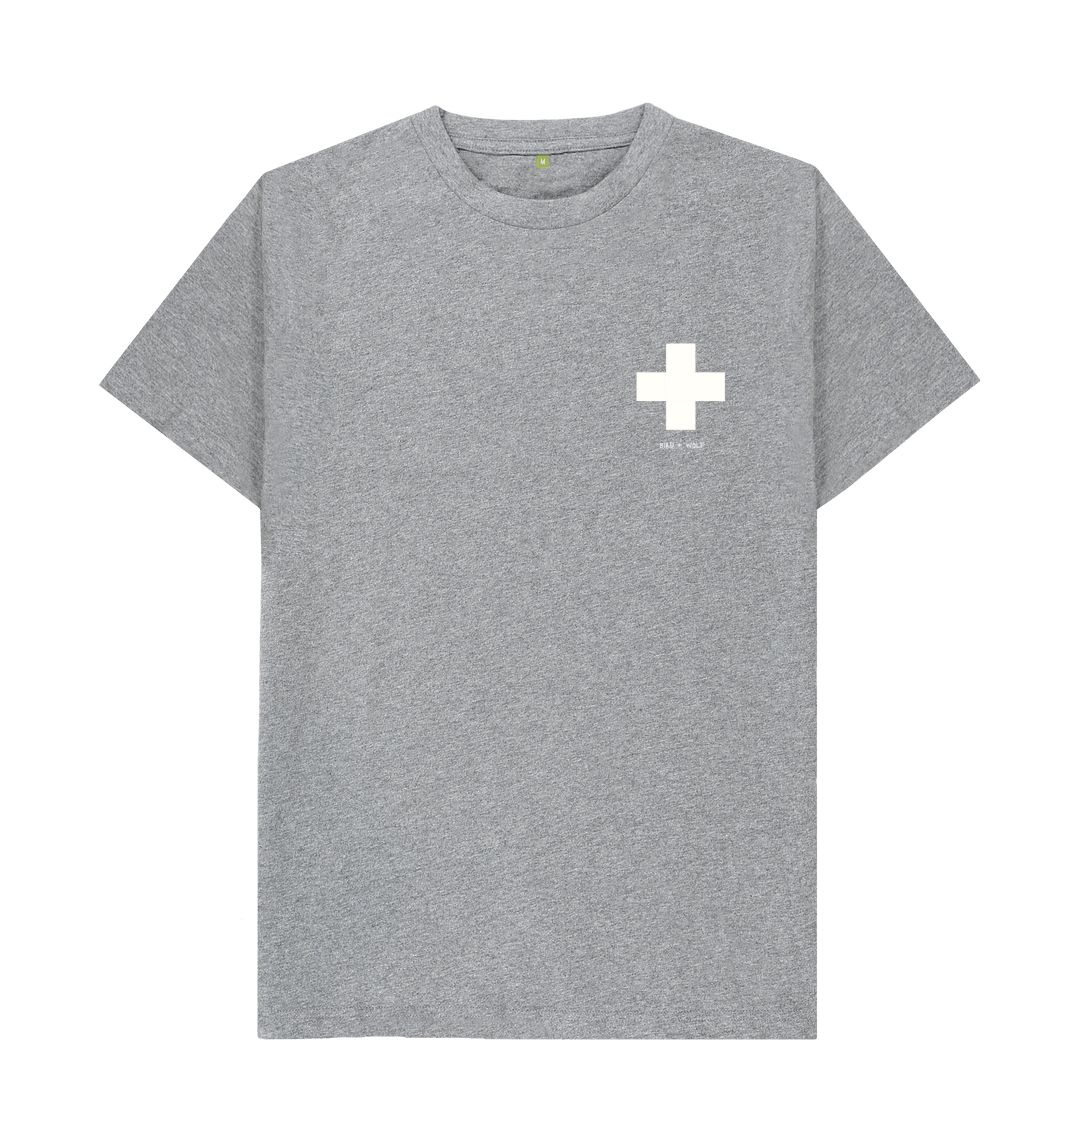 Athletic Grey Small White Cross Classic Tee